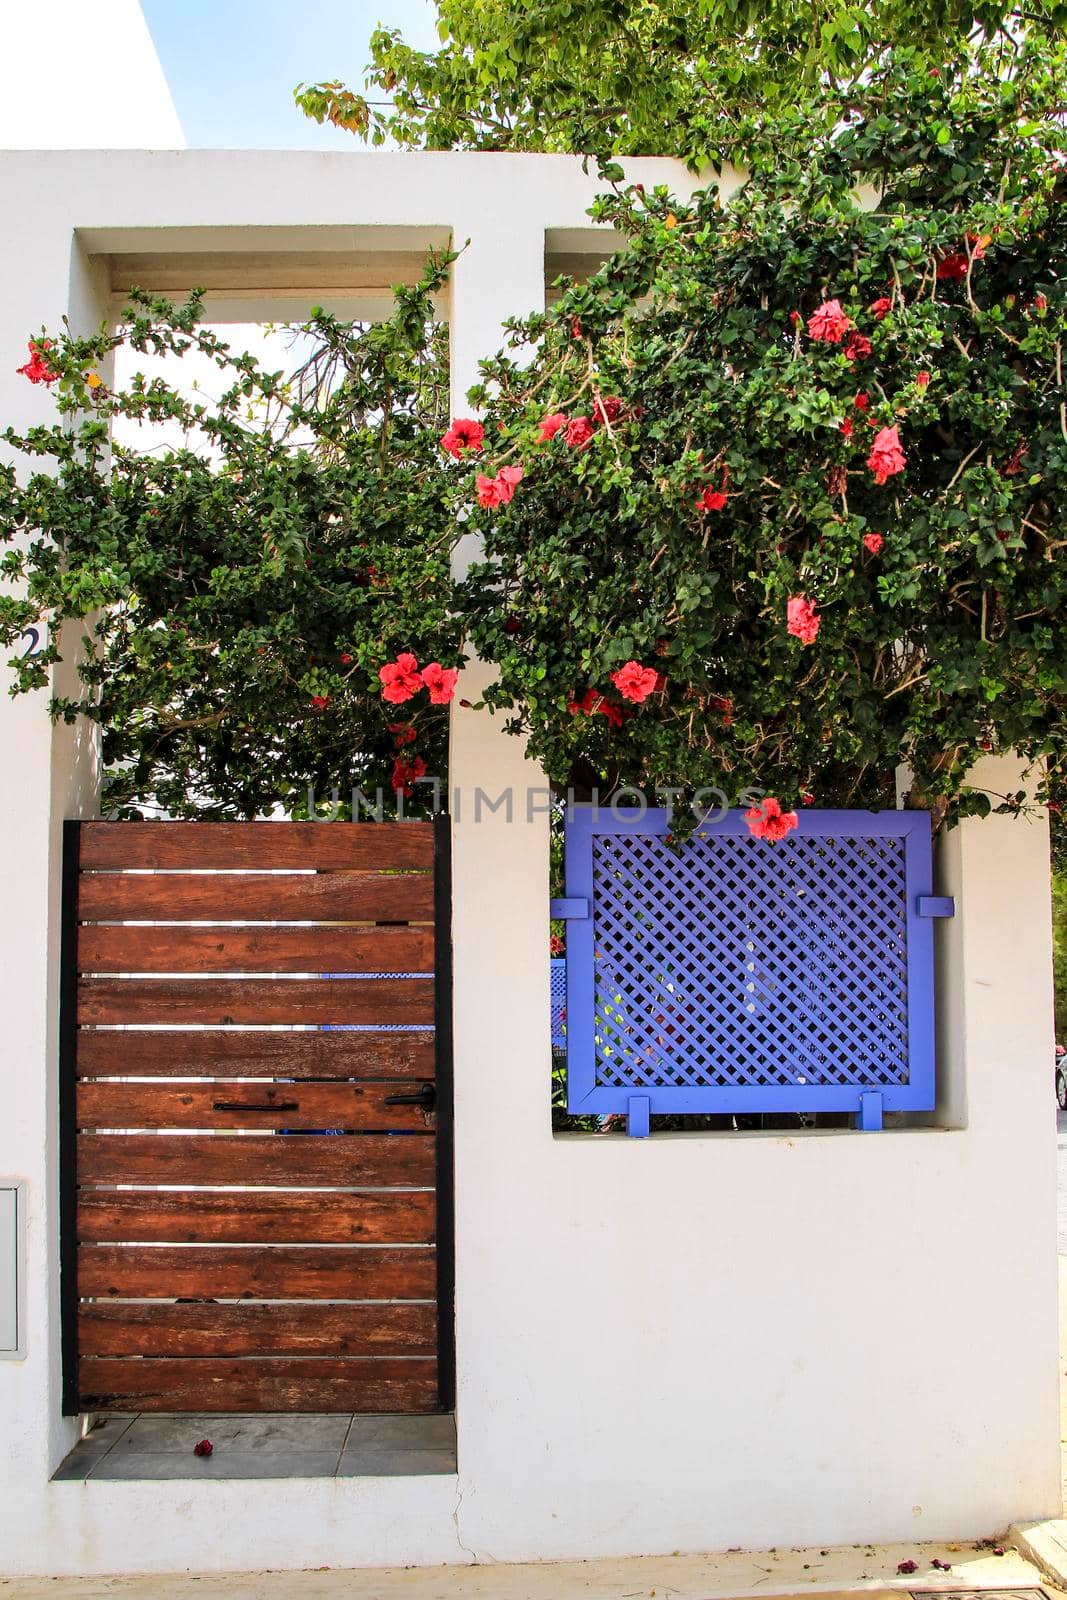 Whitewashed houses and beautiful flowers on the wall in Rodalquilar, Andalusia, Spain